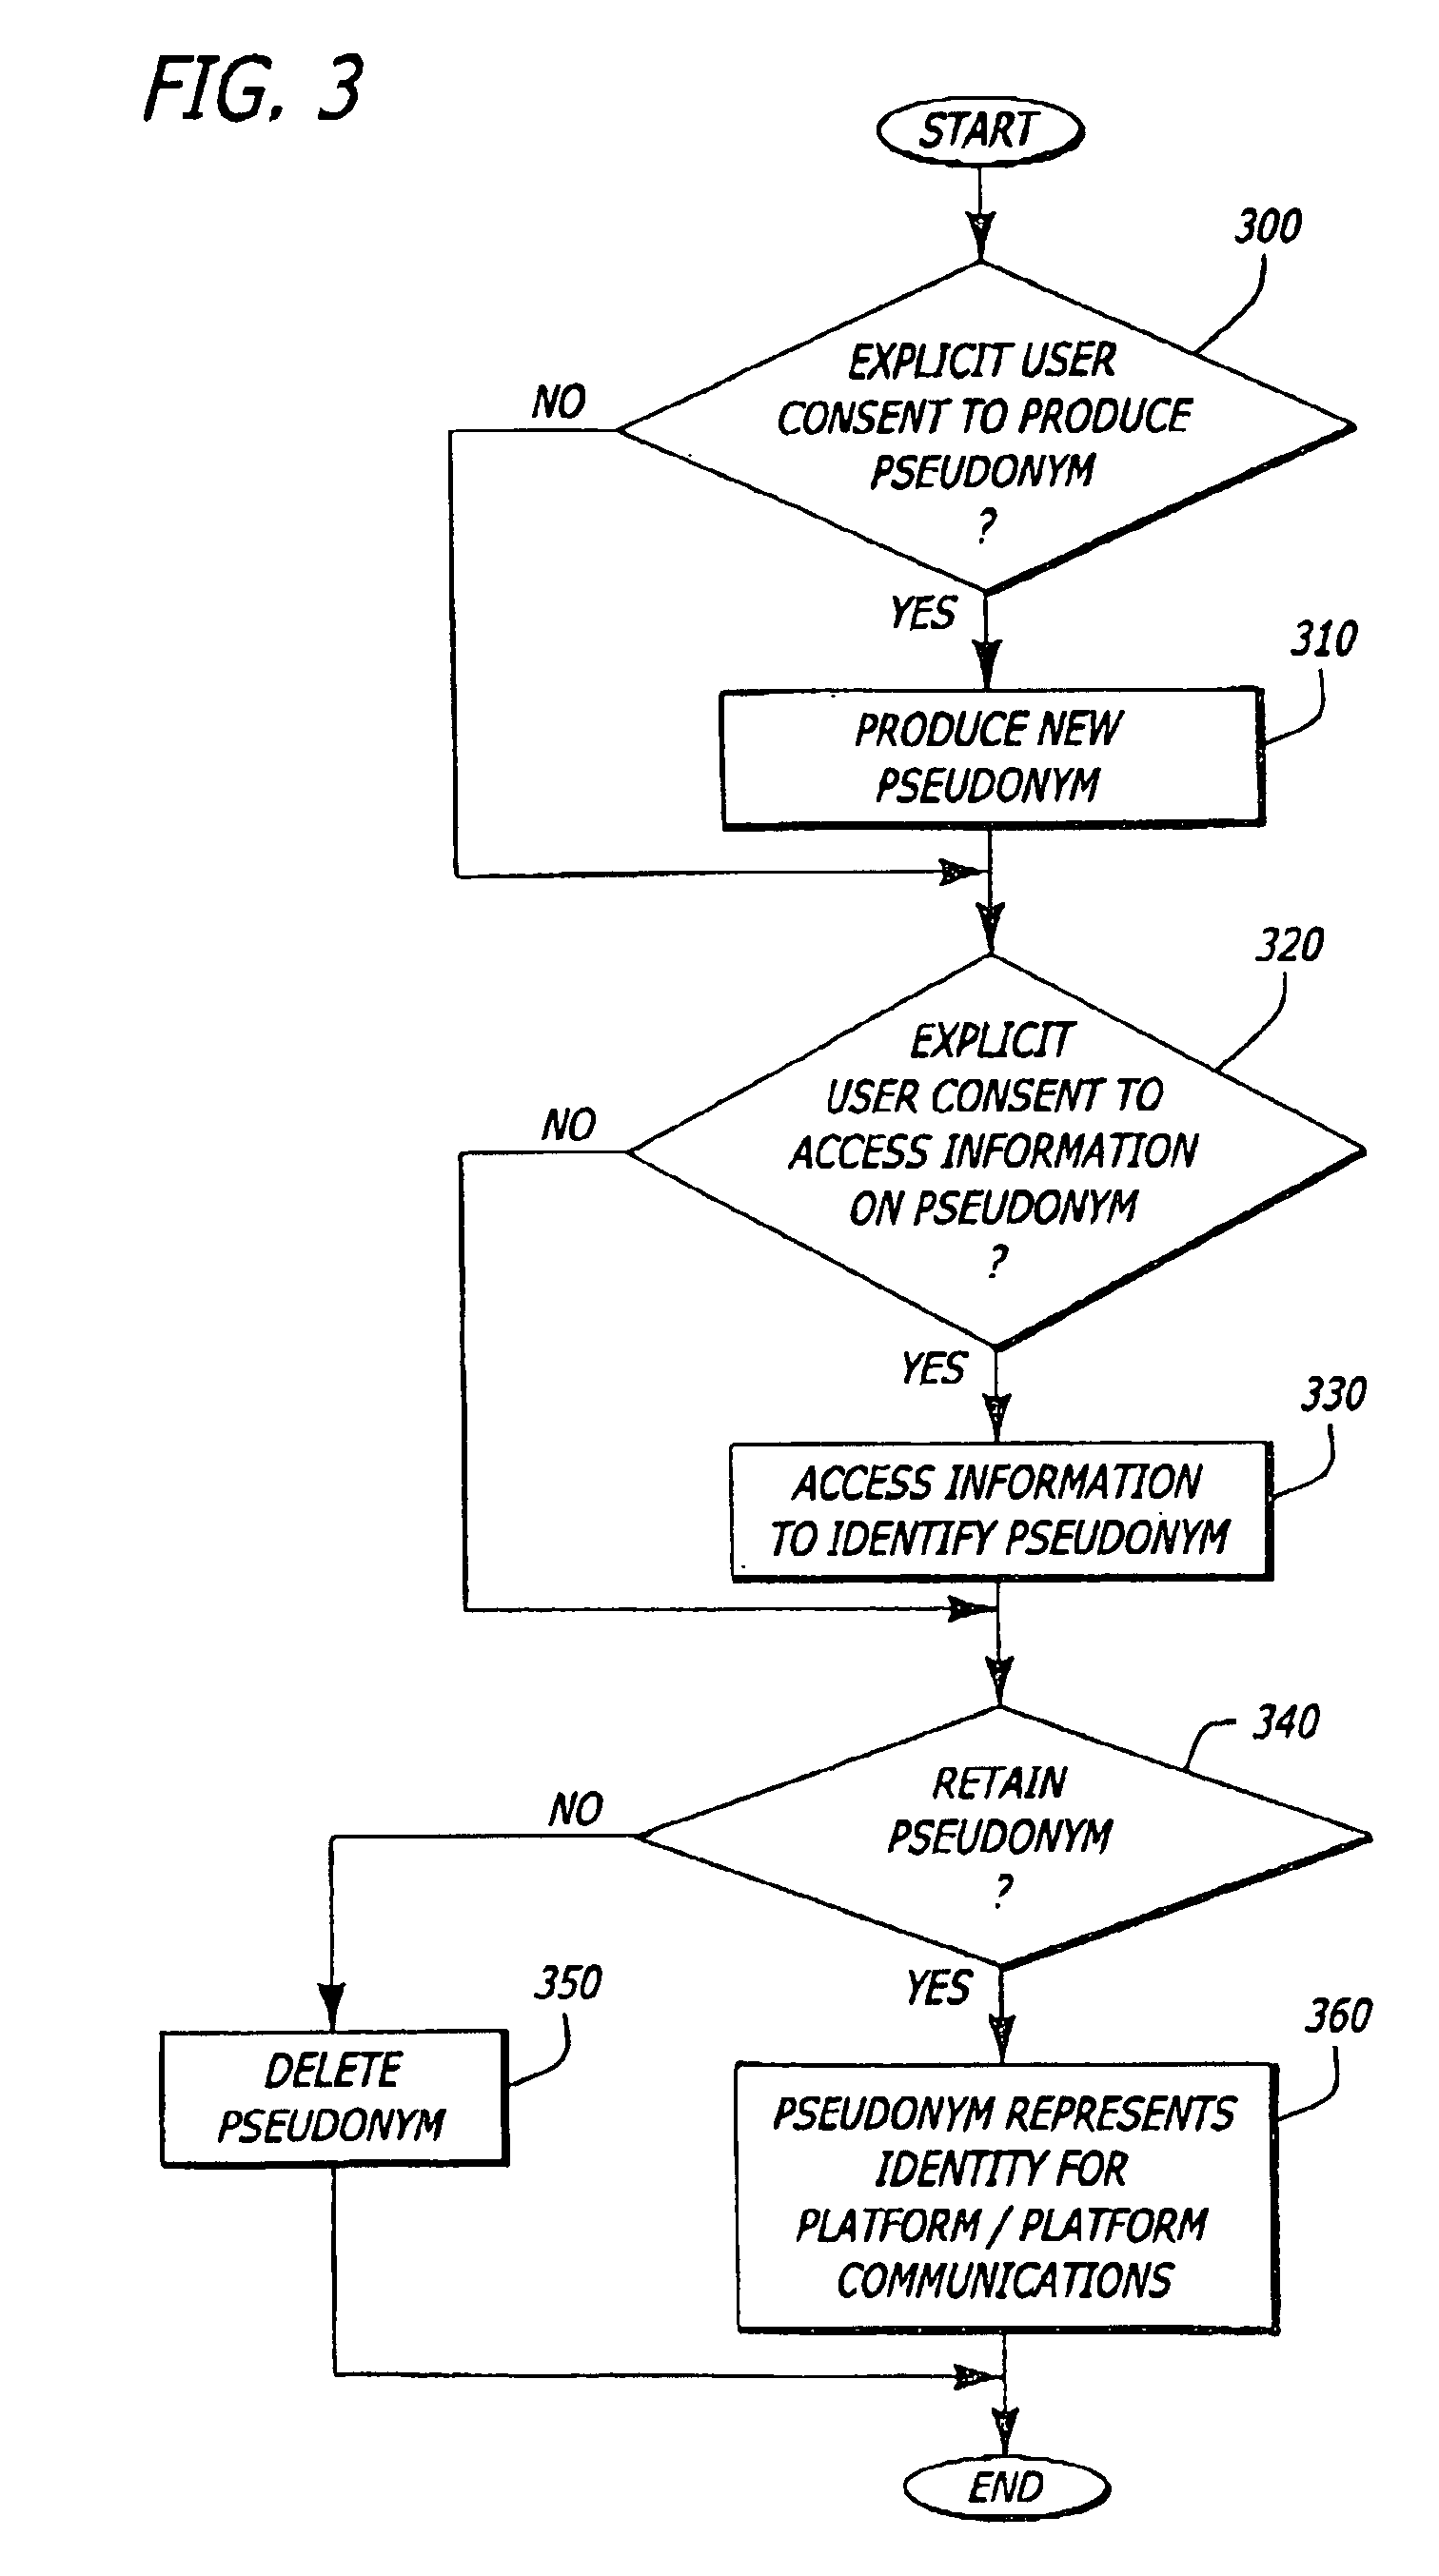 Platform and method for establishing provable identities while maintaining privacy